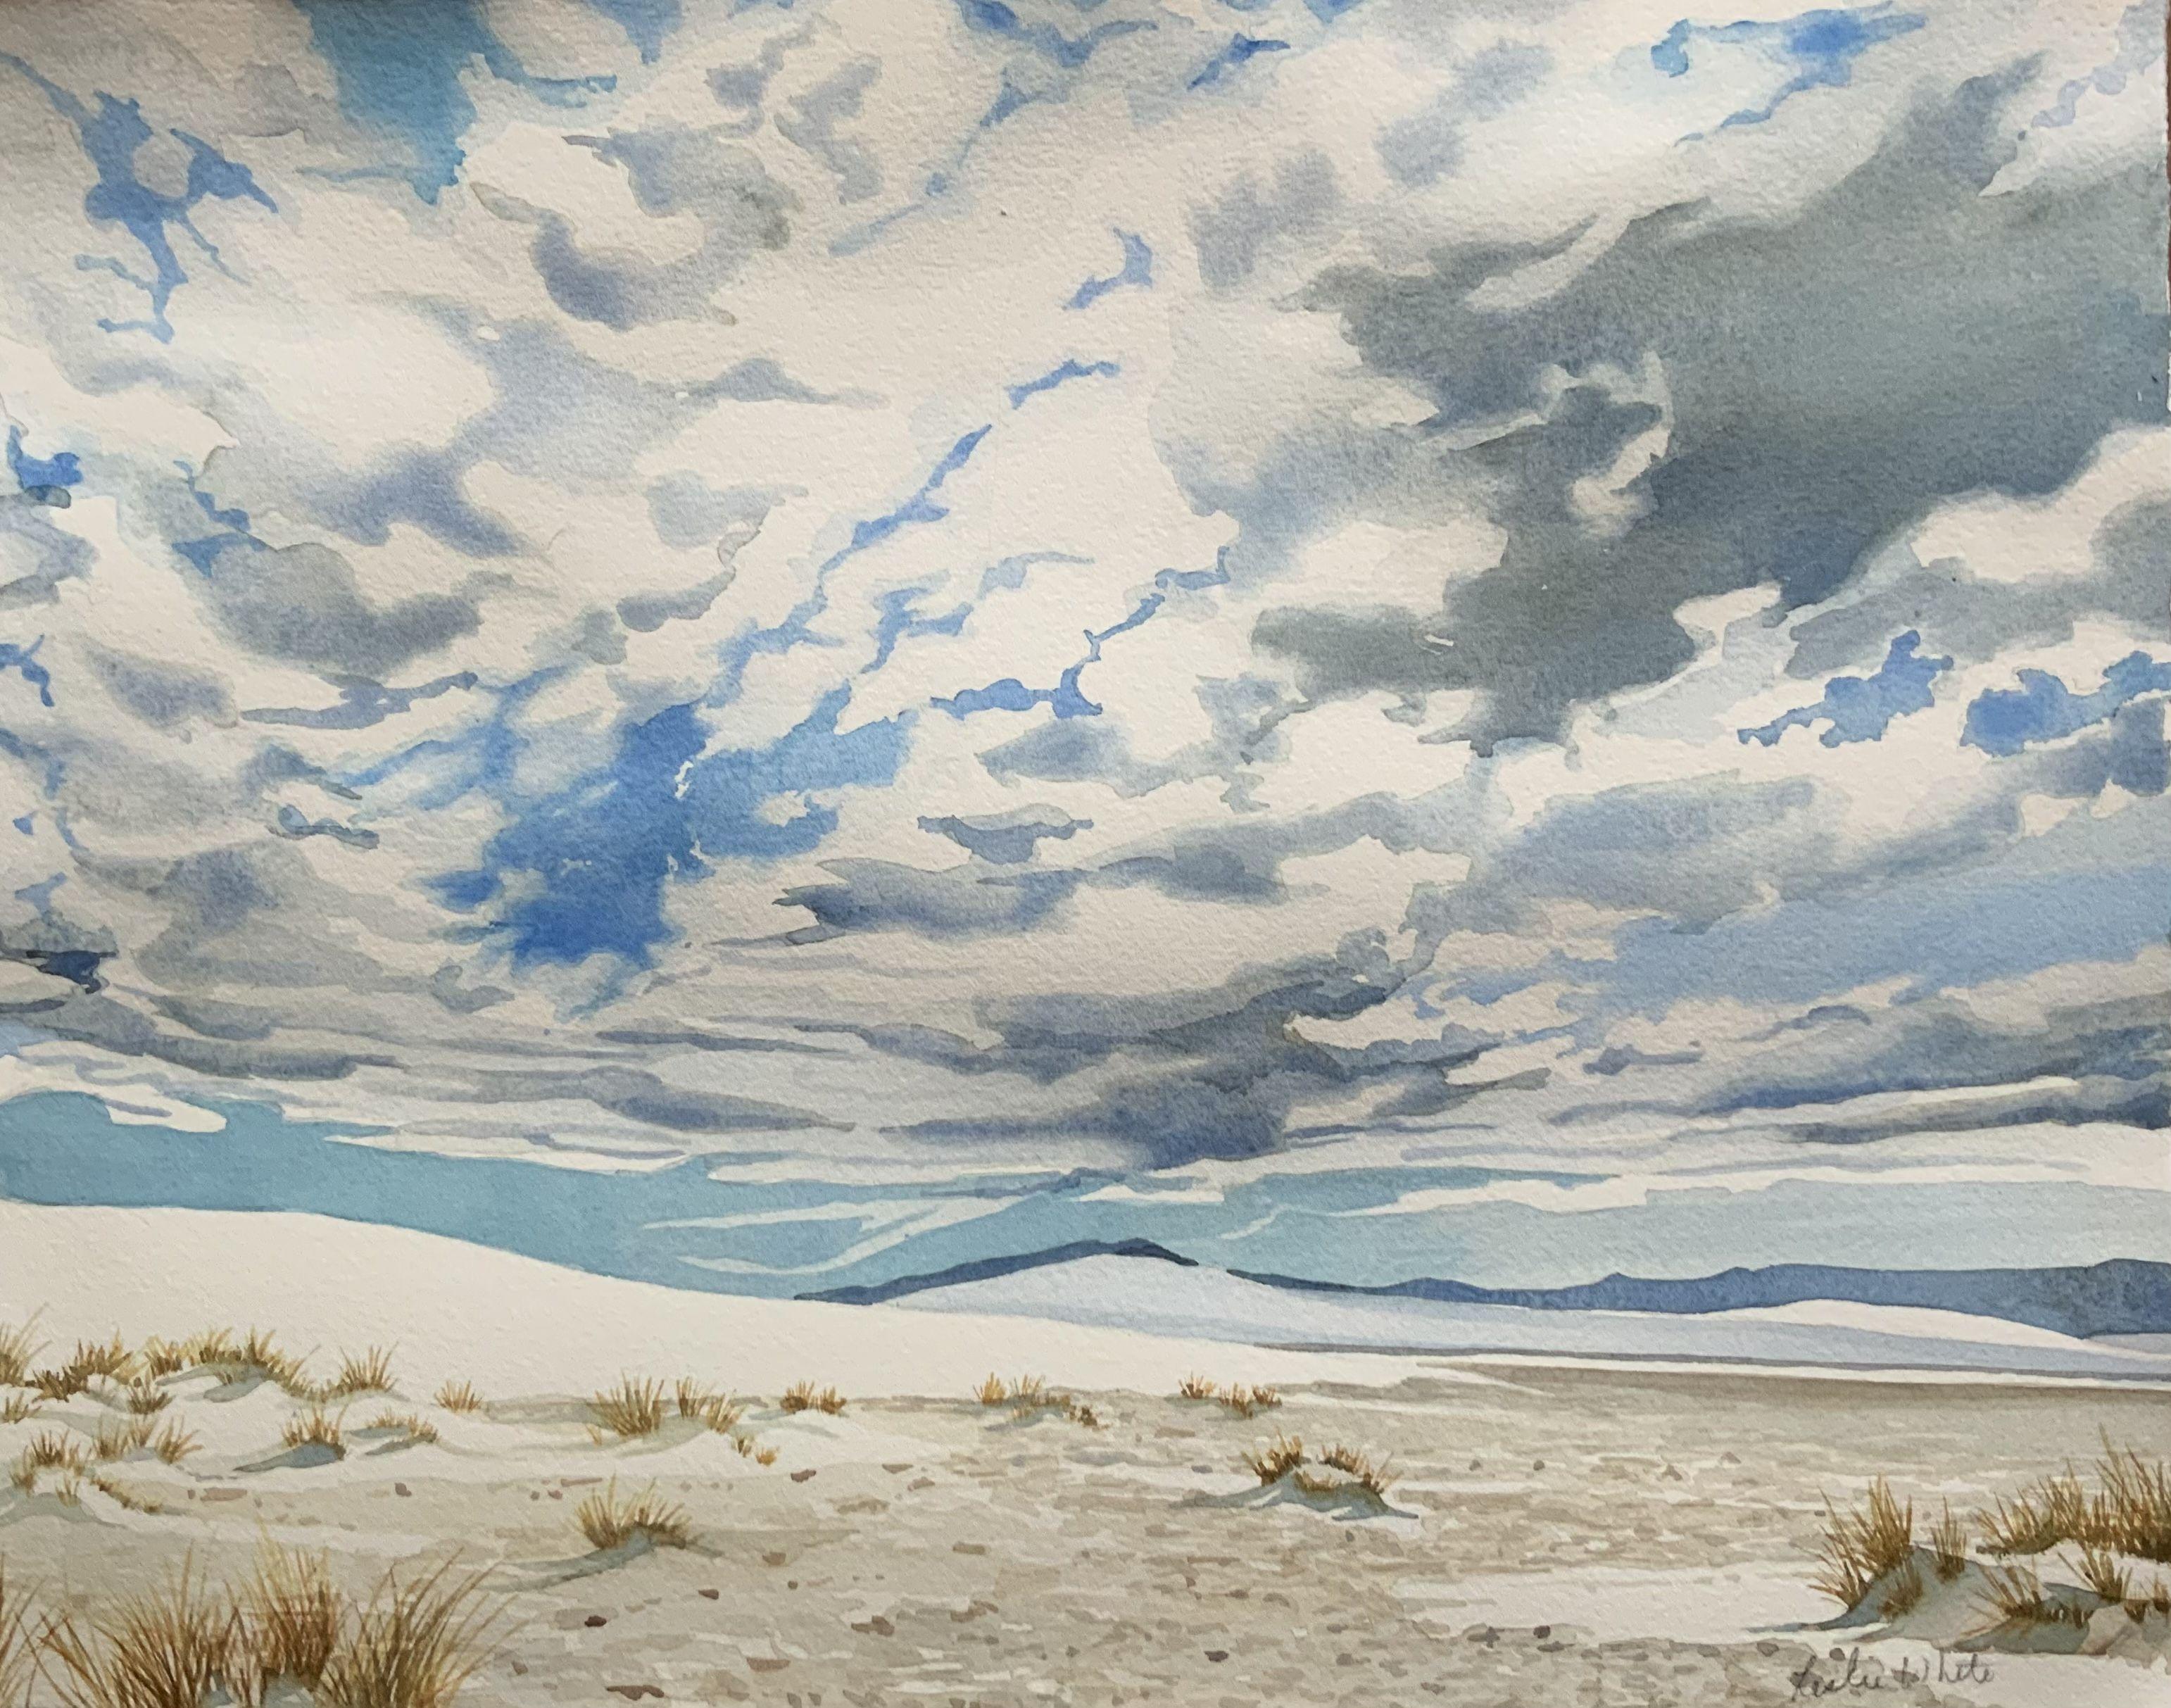 Shadows Over White Sands, Painting, Watercolor on Watercolor Paper - Art by Leslie White